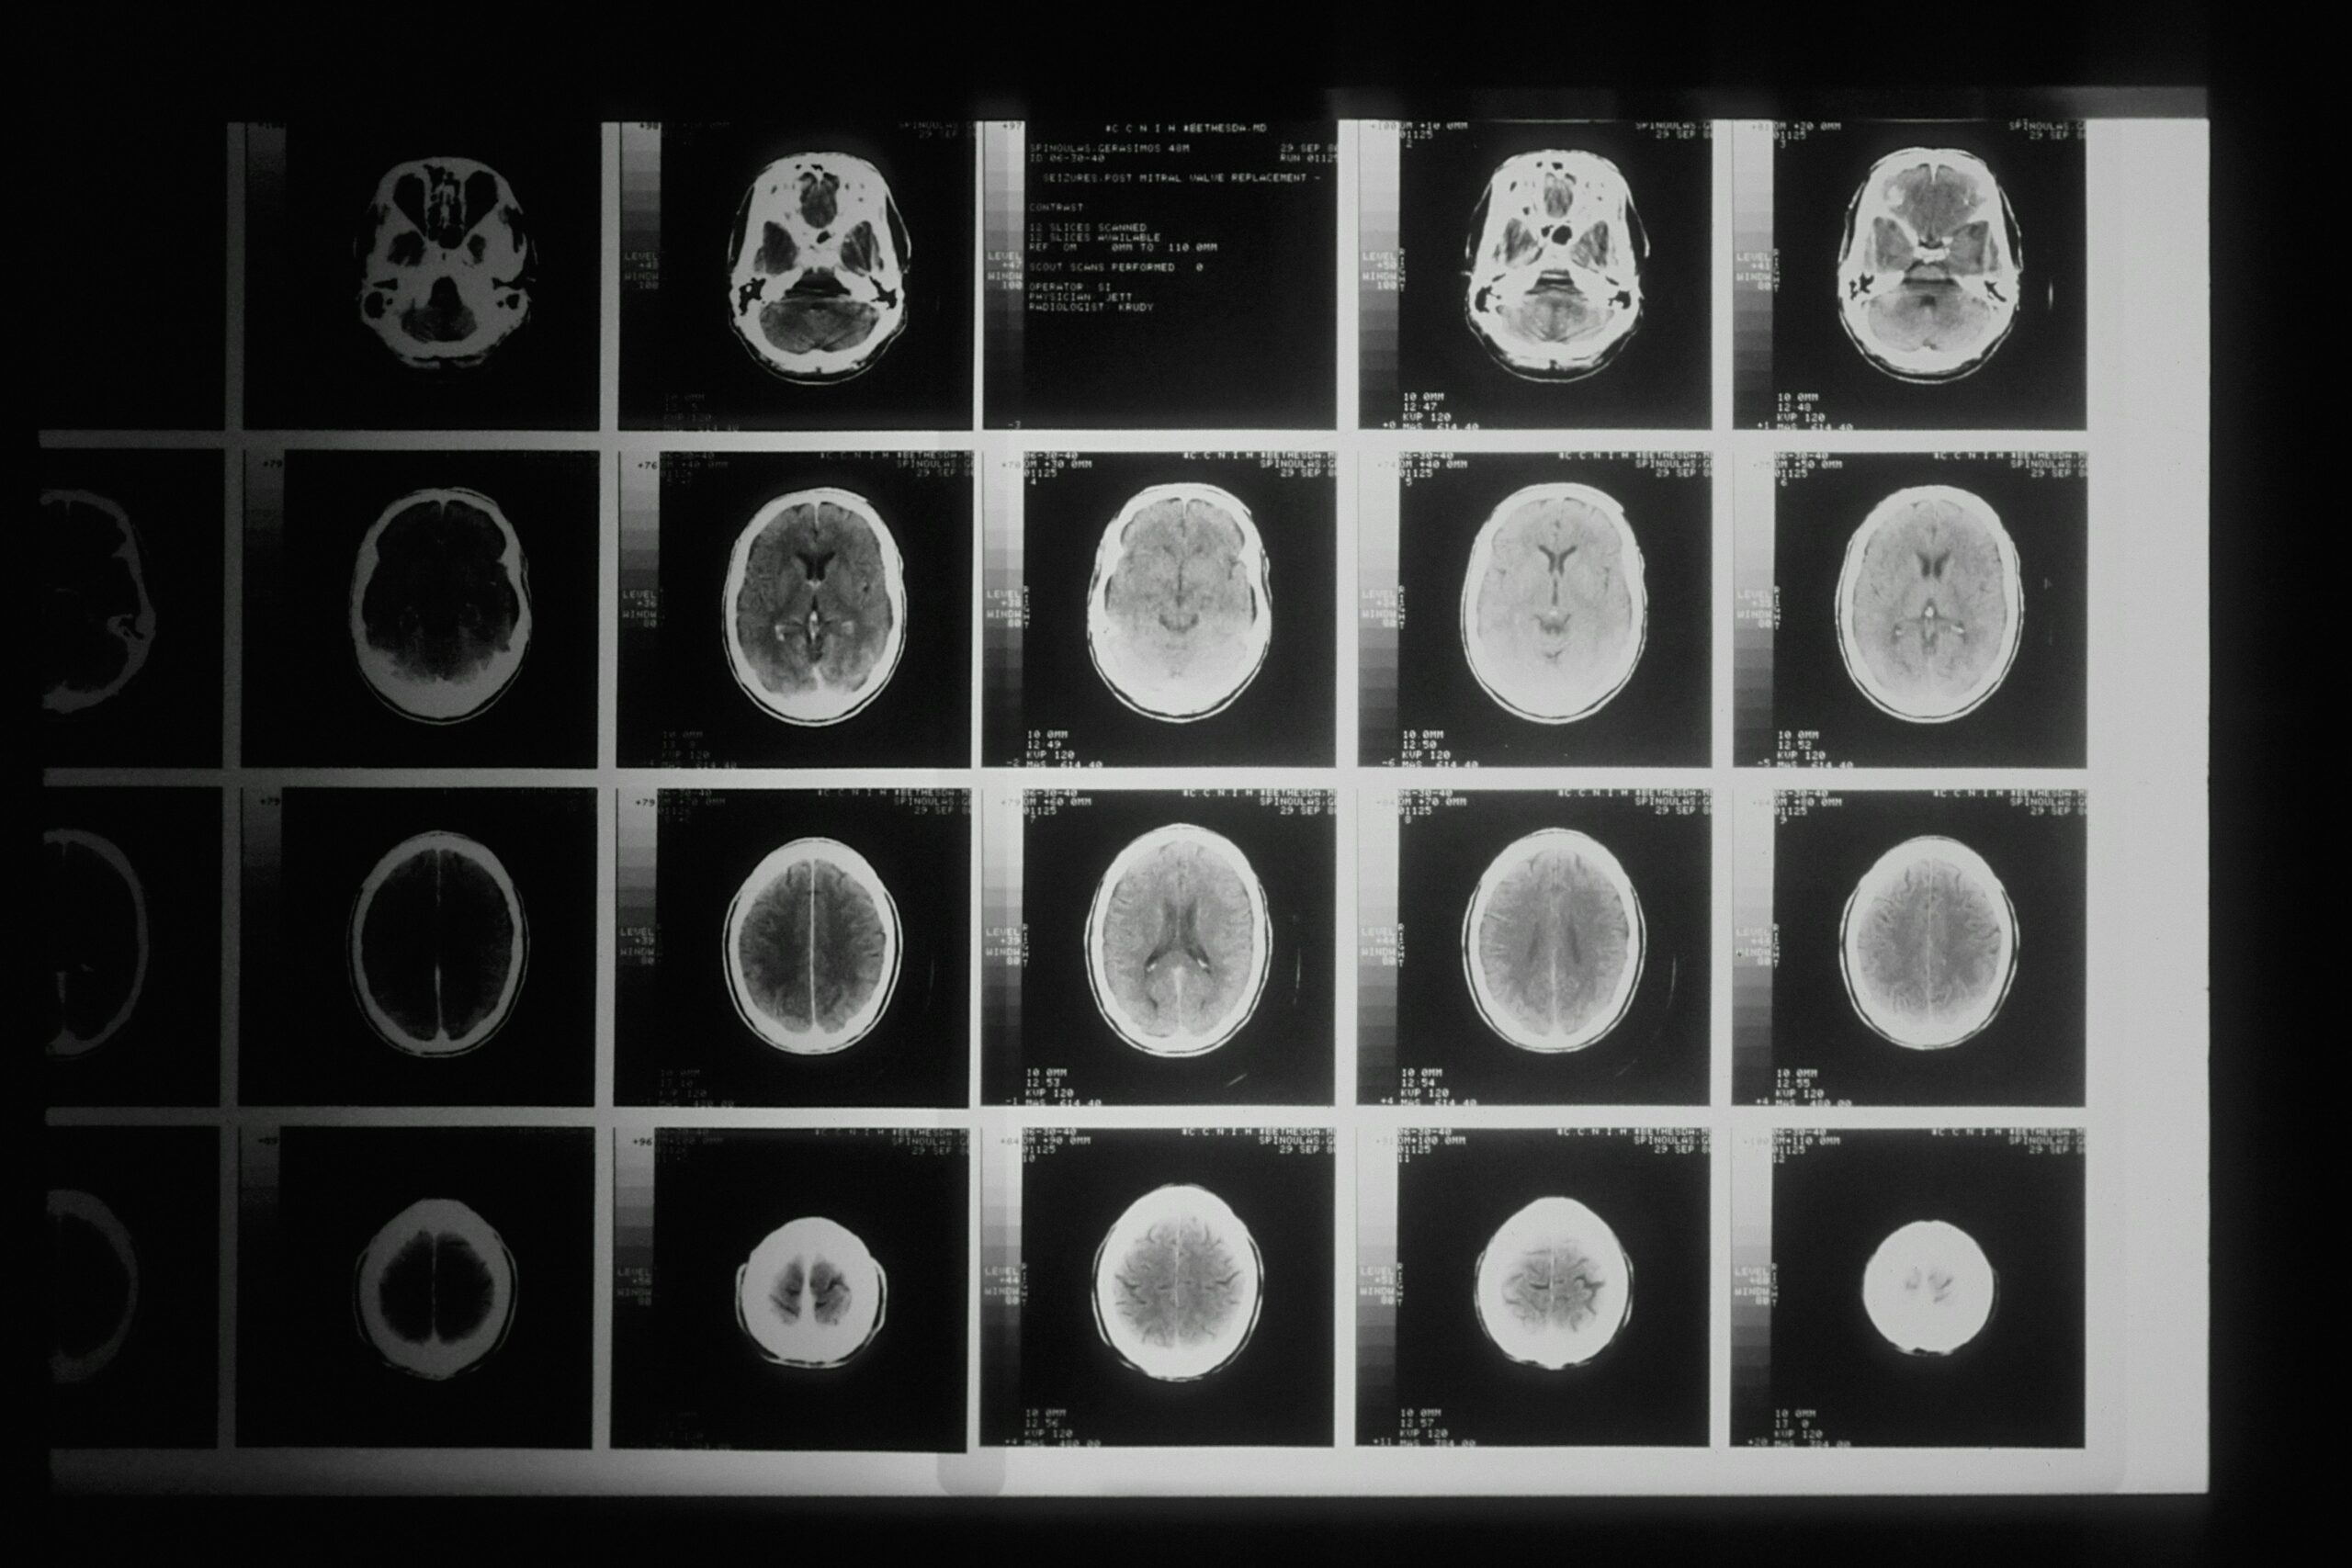 A scan image showing multiple x-rays of the brain.